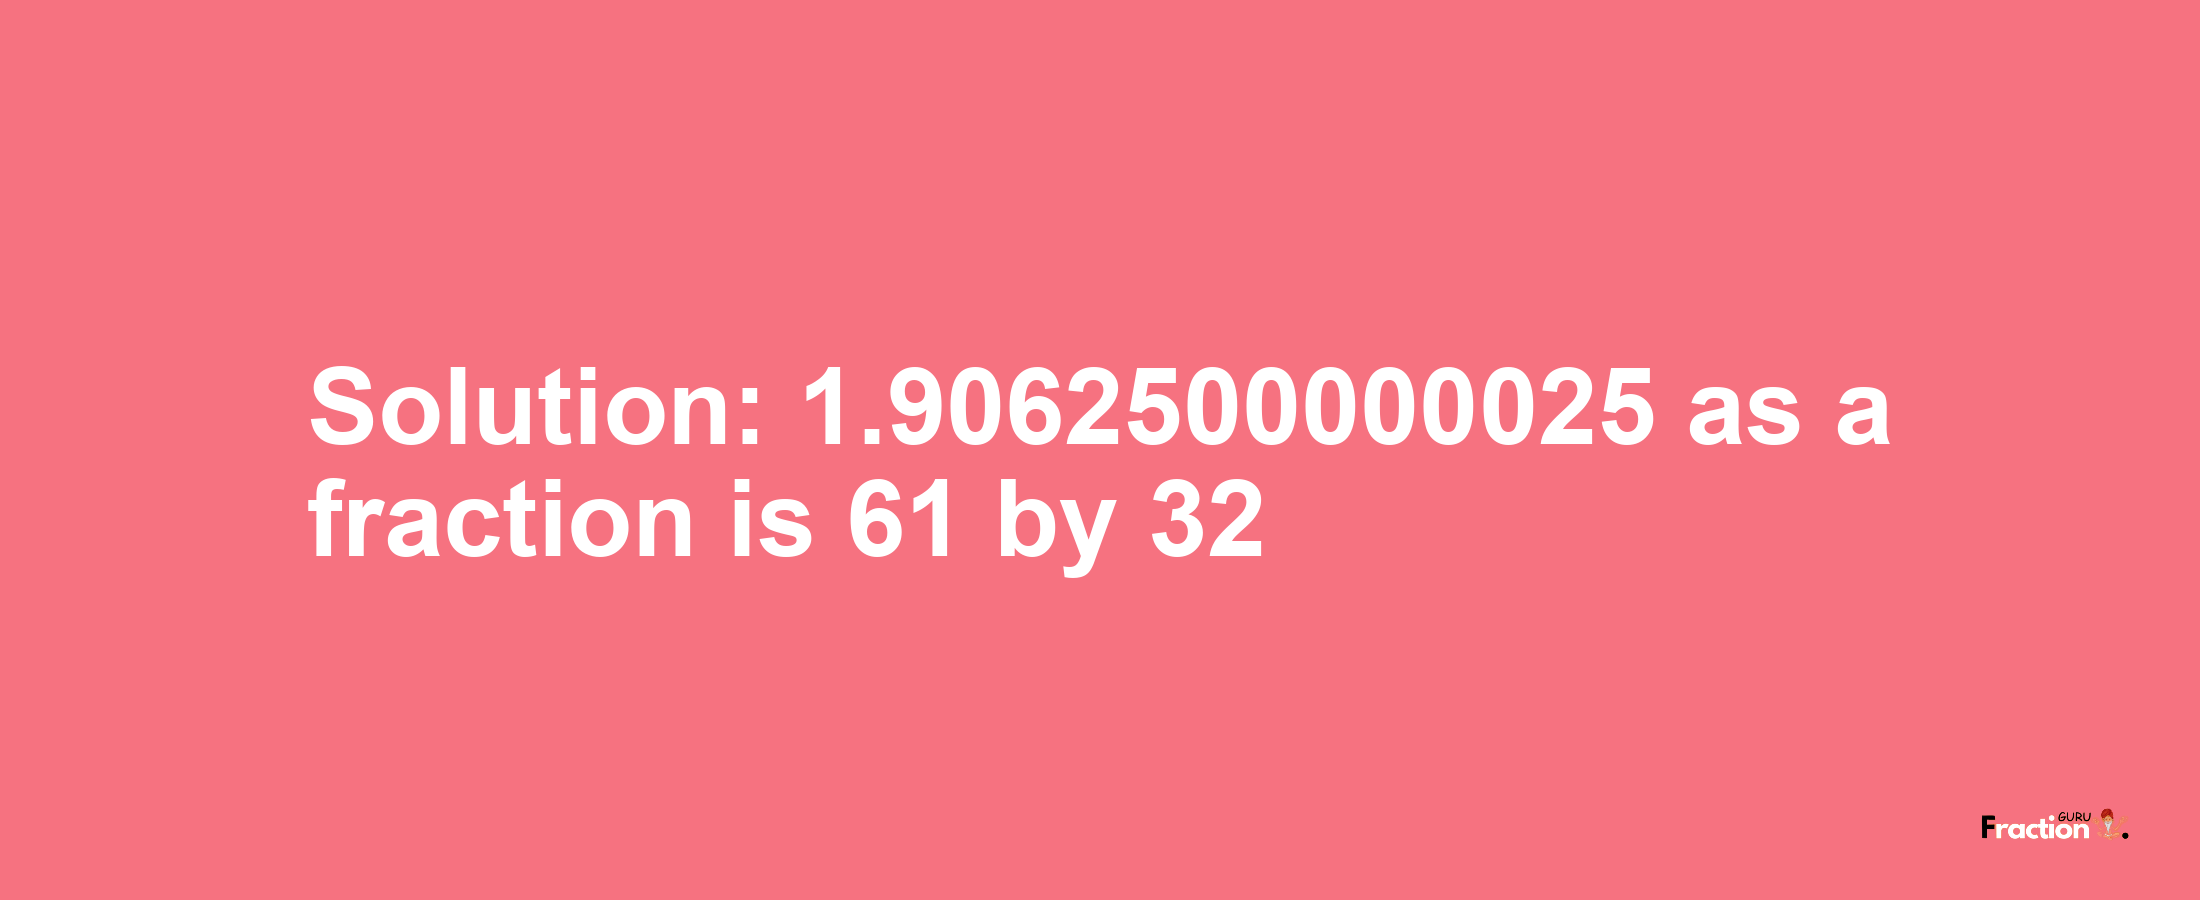 Solution:1.9062500000025 as a fraction is 61/32